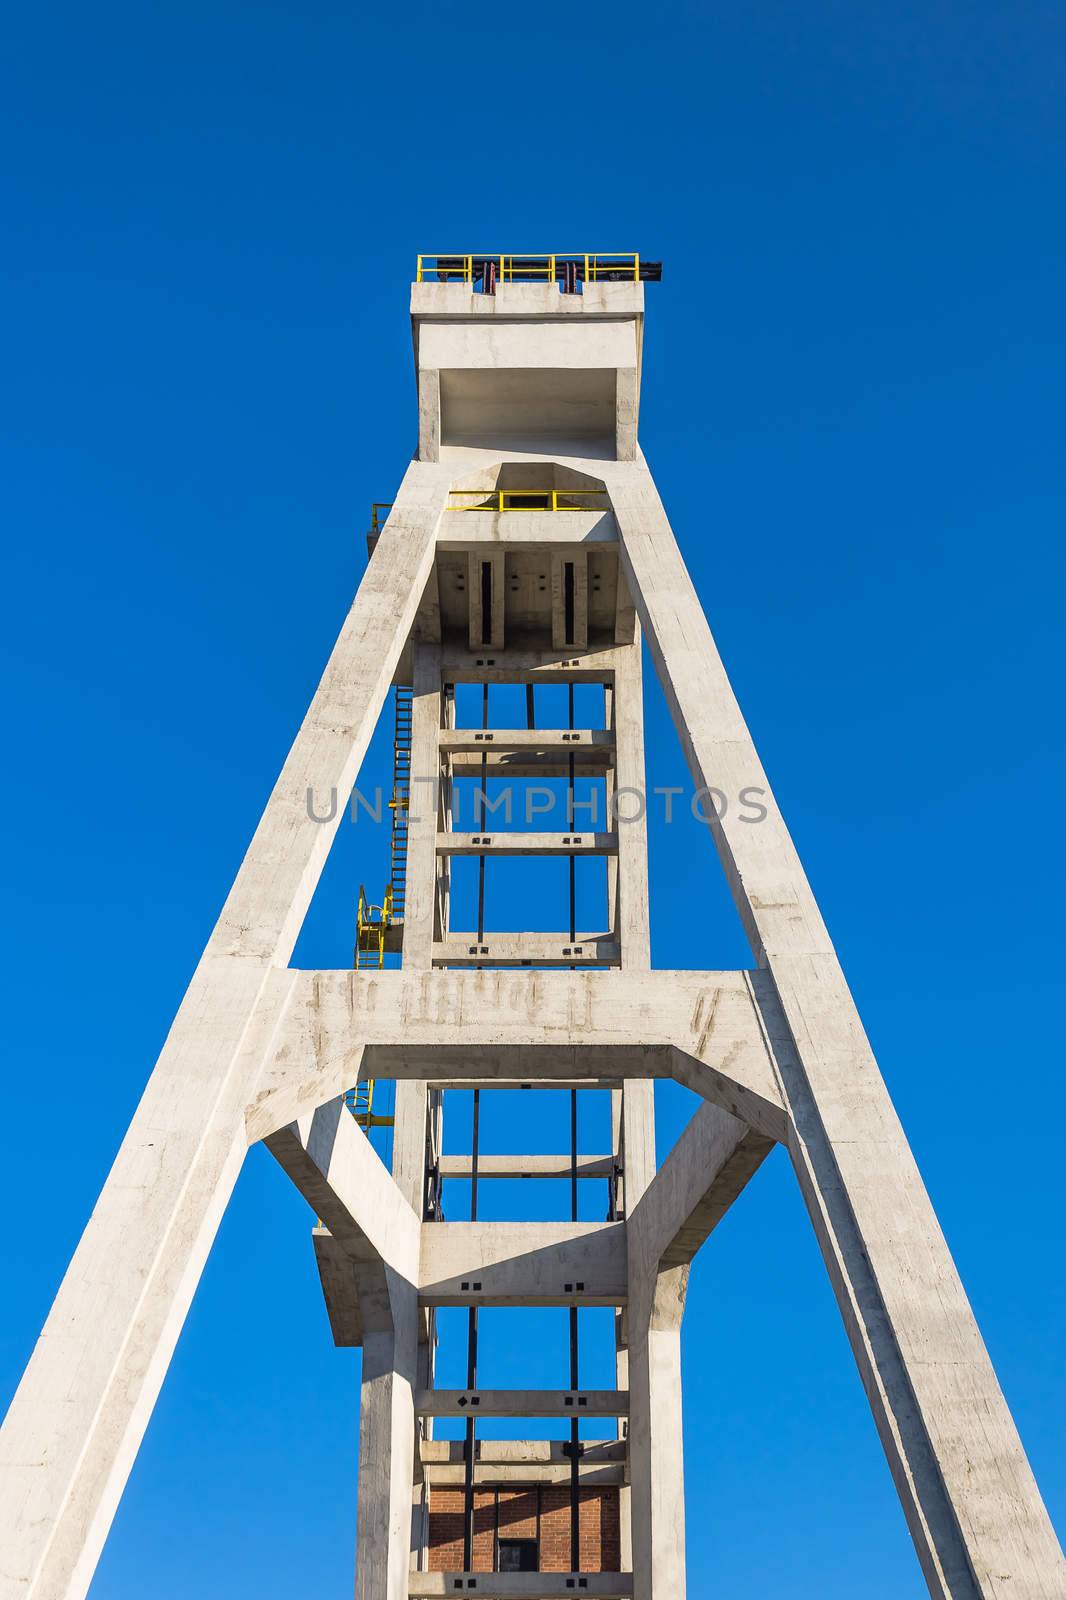 Fron view of historic hoist tower of the former "President" mine shaft in Chorzow, Silesia region, Poland. The mine shaft was in use until 1933.